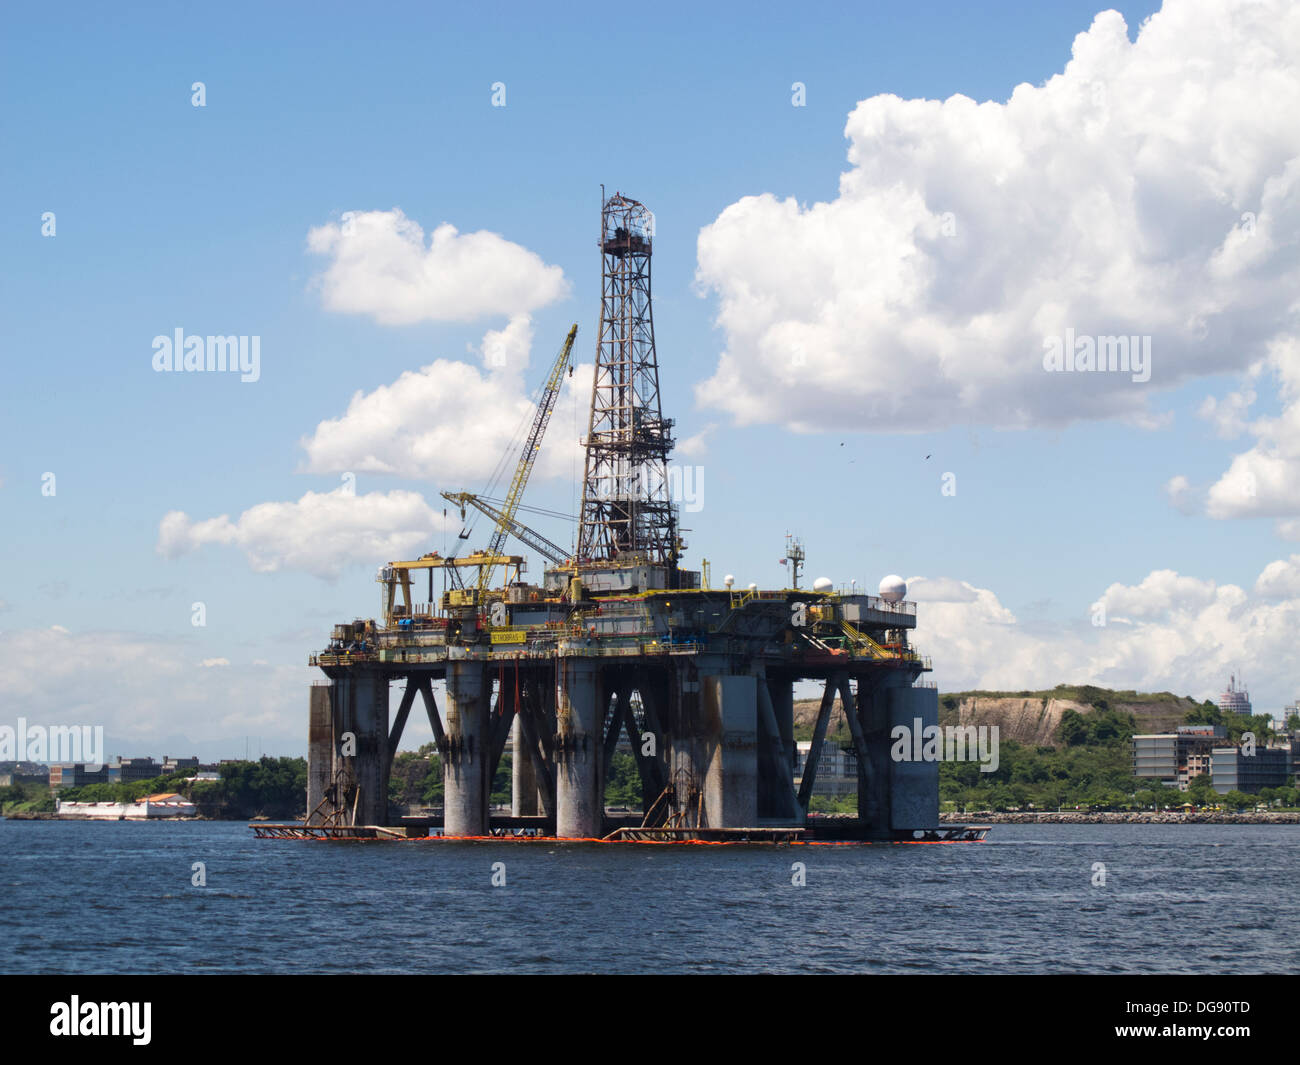 Semi submersible deep water oil drilling rig at Guanabara bay, Rio de Janeiro, waiting to go Offshore. Stock Photo